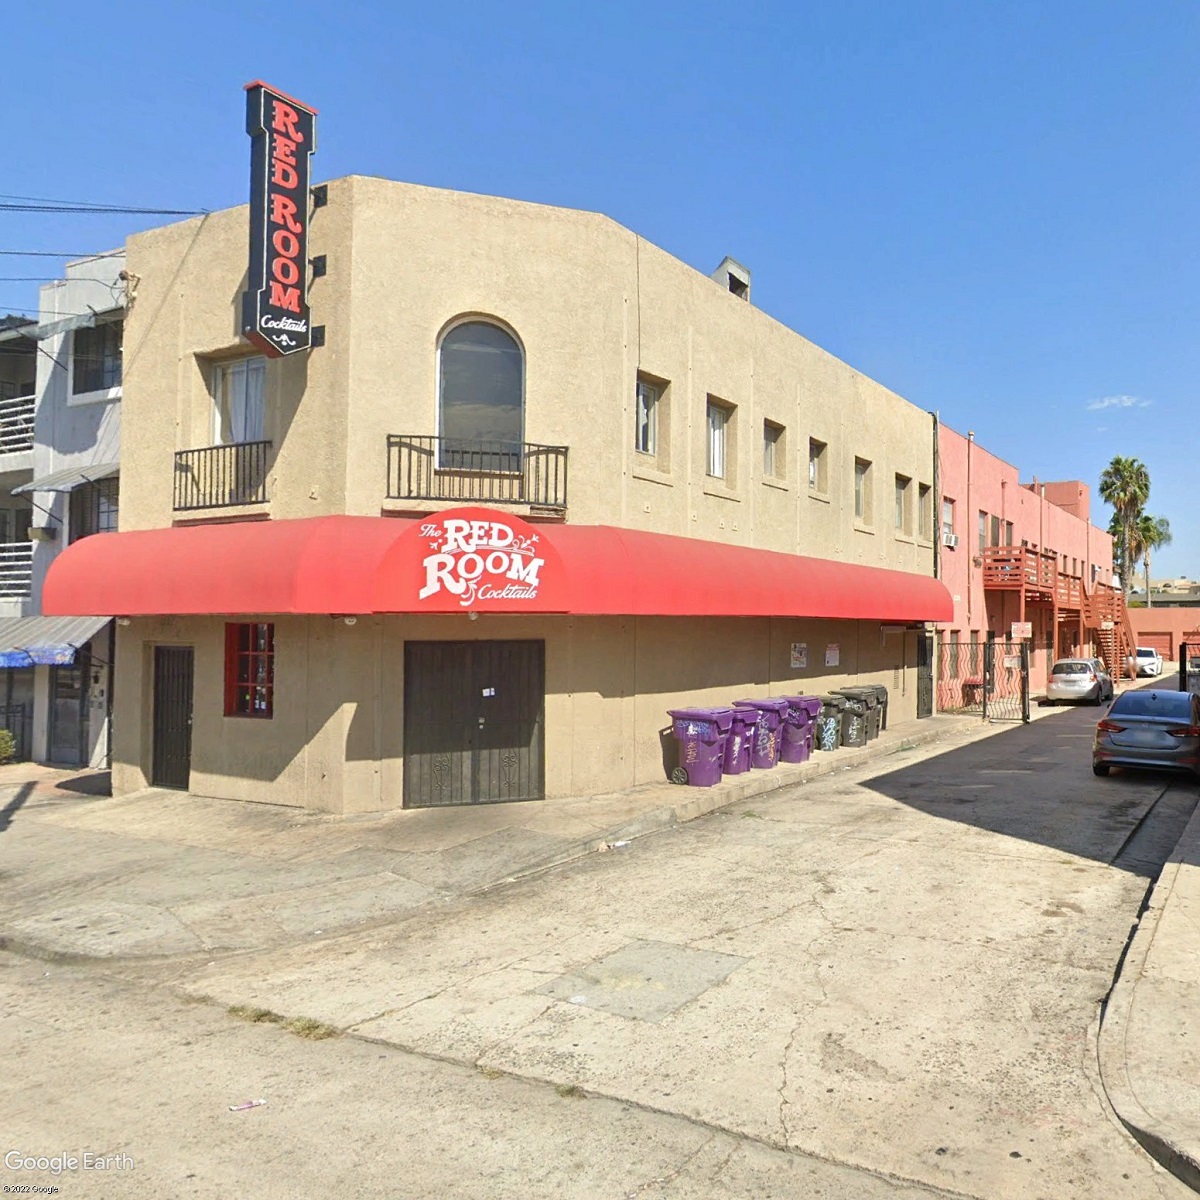 Long Beach’s Red Room to Become Baby Gee